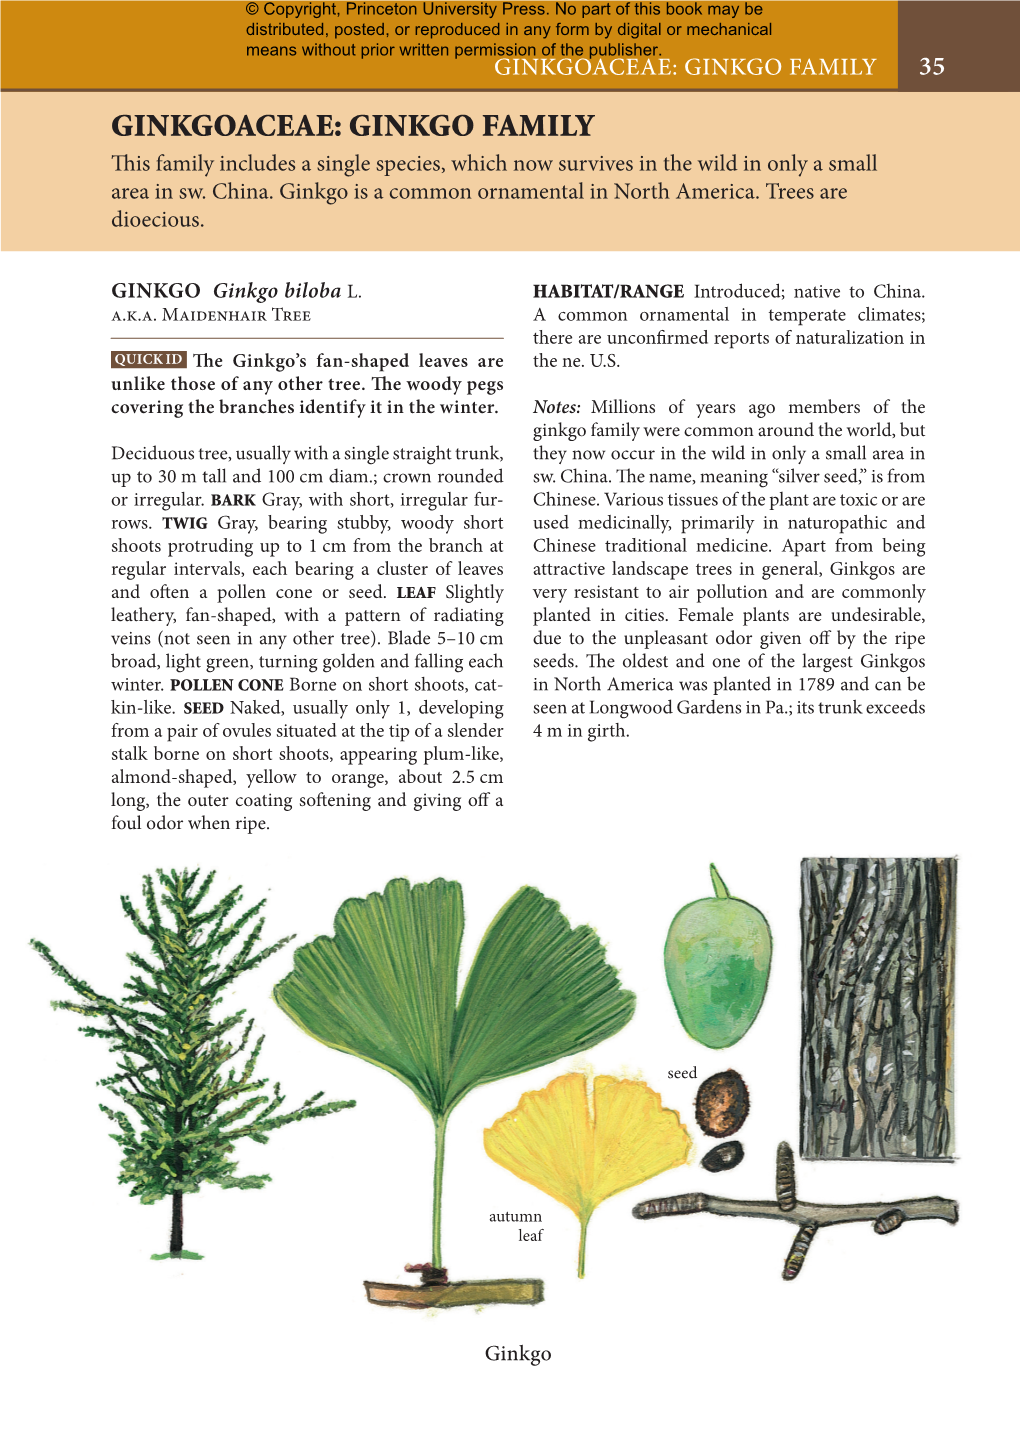 Ginkgoaceae: Ginkgo Family 35 Ginkgoaceae: Ginkgo Family Th Is Family Includes a Single Species, Which Now Survives in the Wild in Only a Small Area in Sw